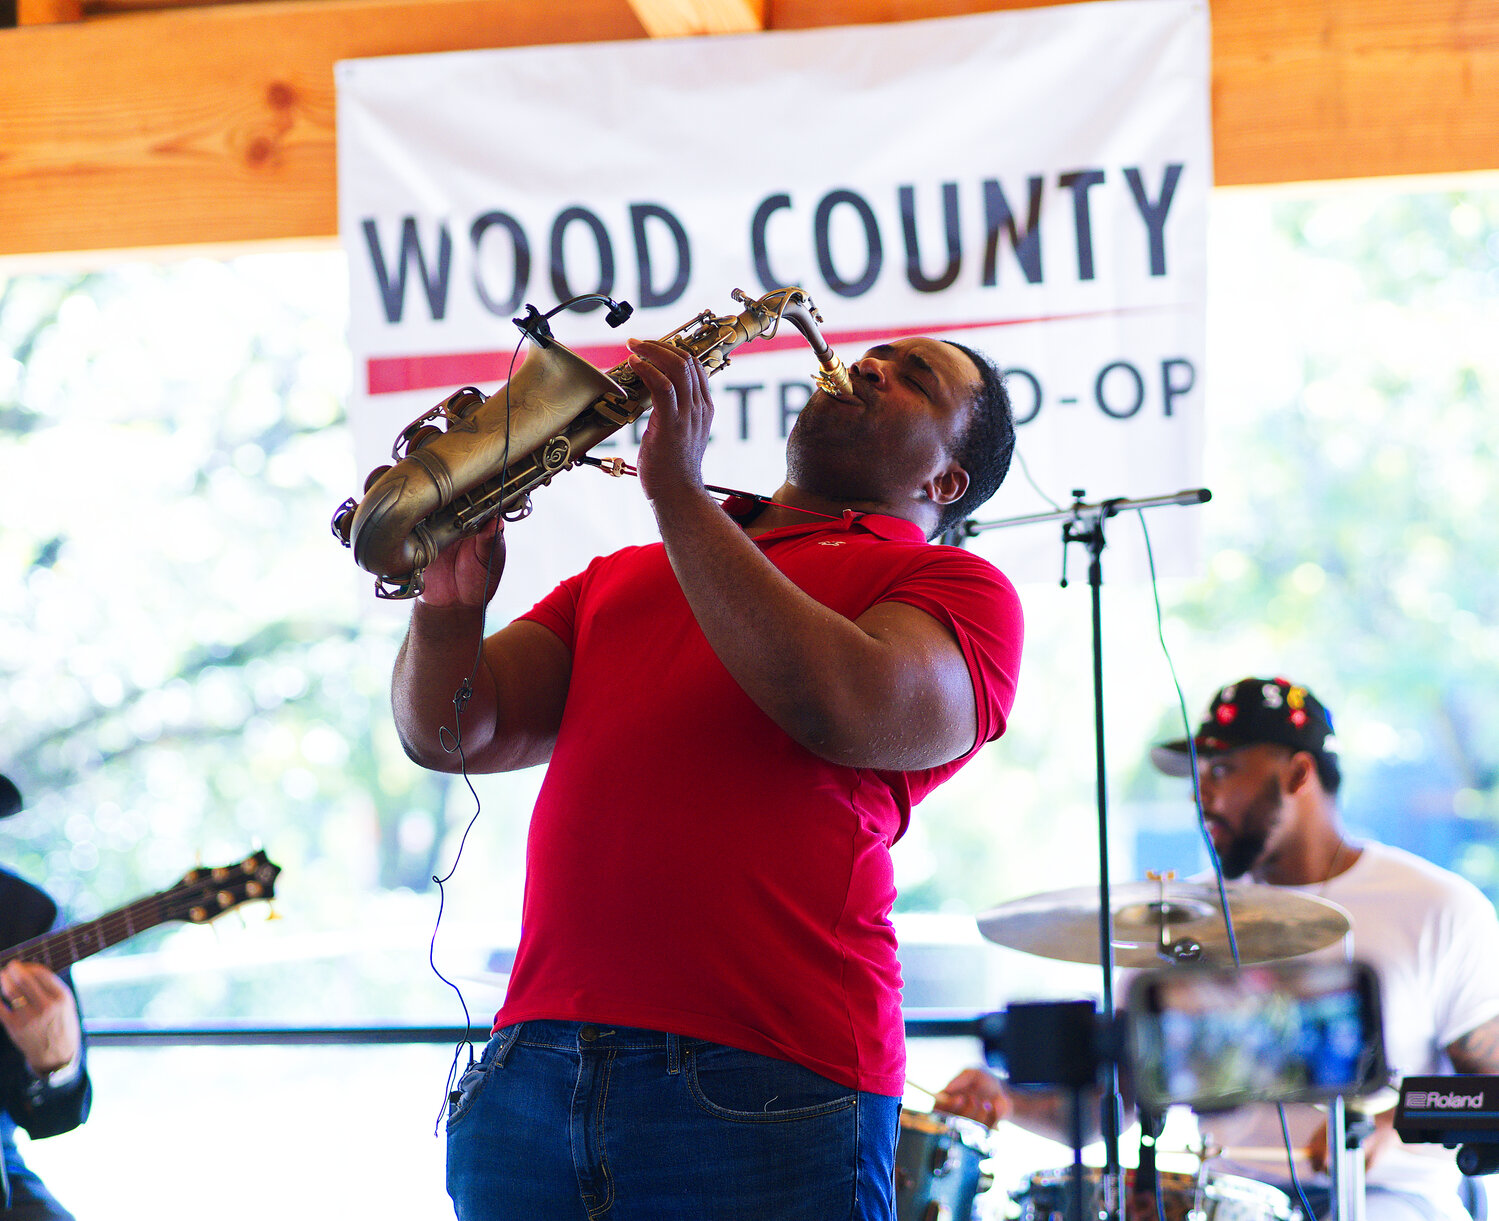 Low D and his Jam Band were special performers for the annual members’ meeting of the Wood County Electric Co-op last Friday in Quitman, held in the new pavialion at Jim Hogg City Park.